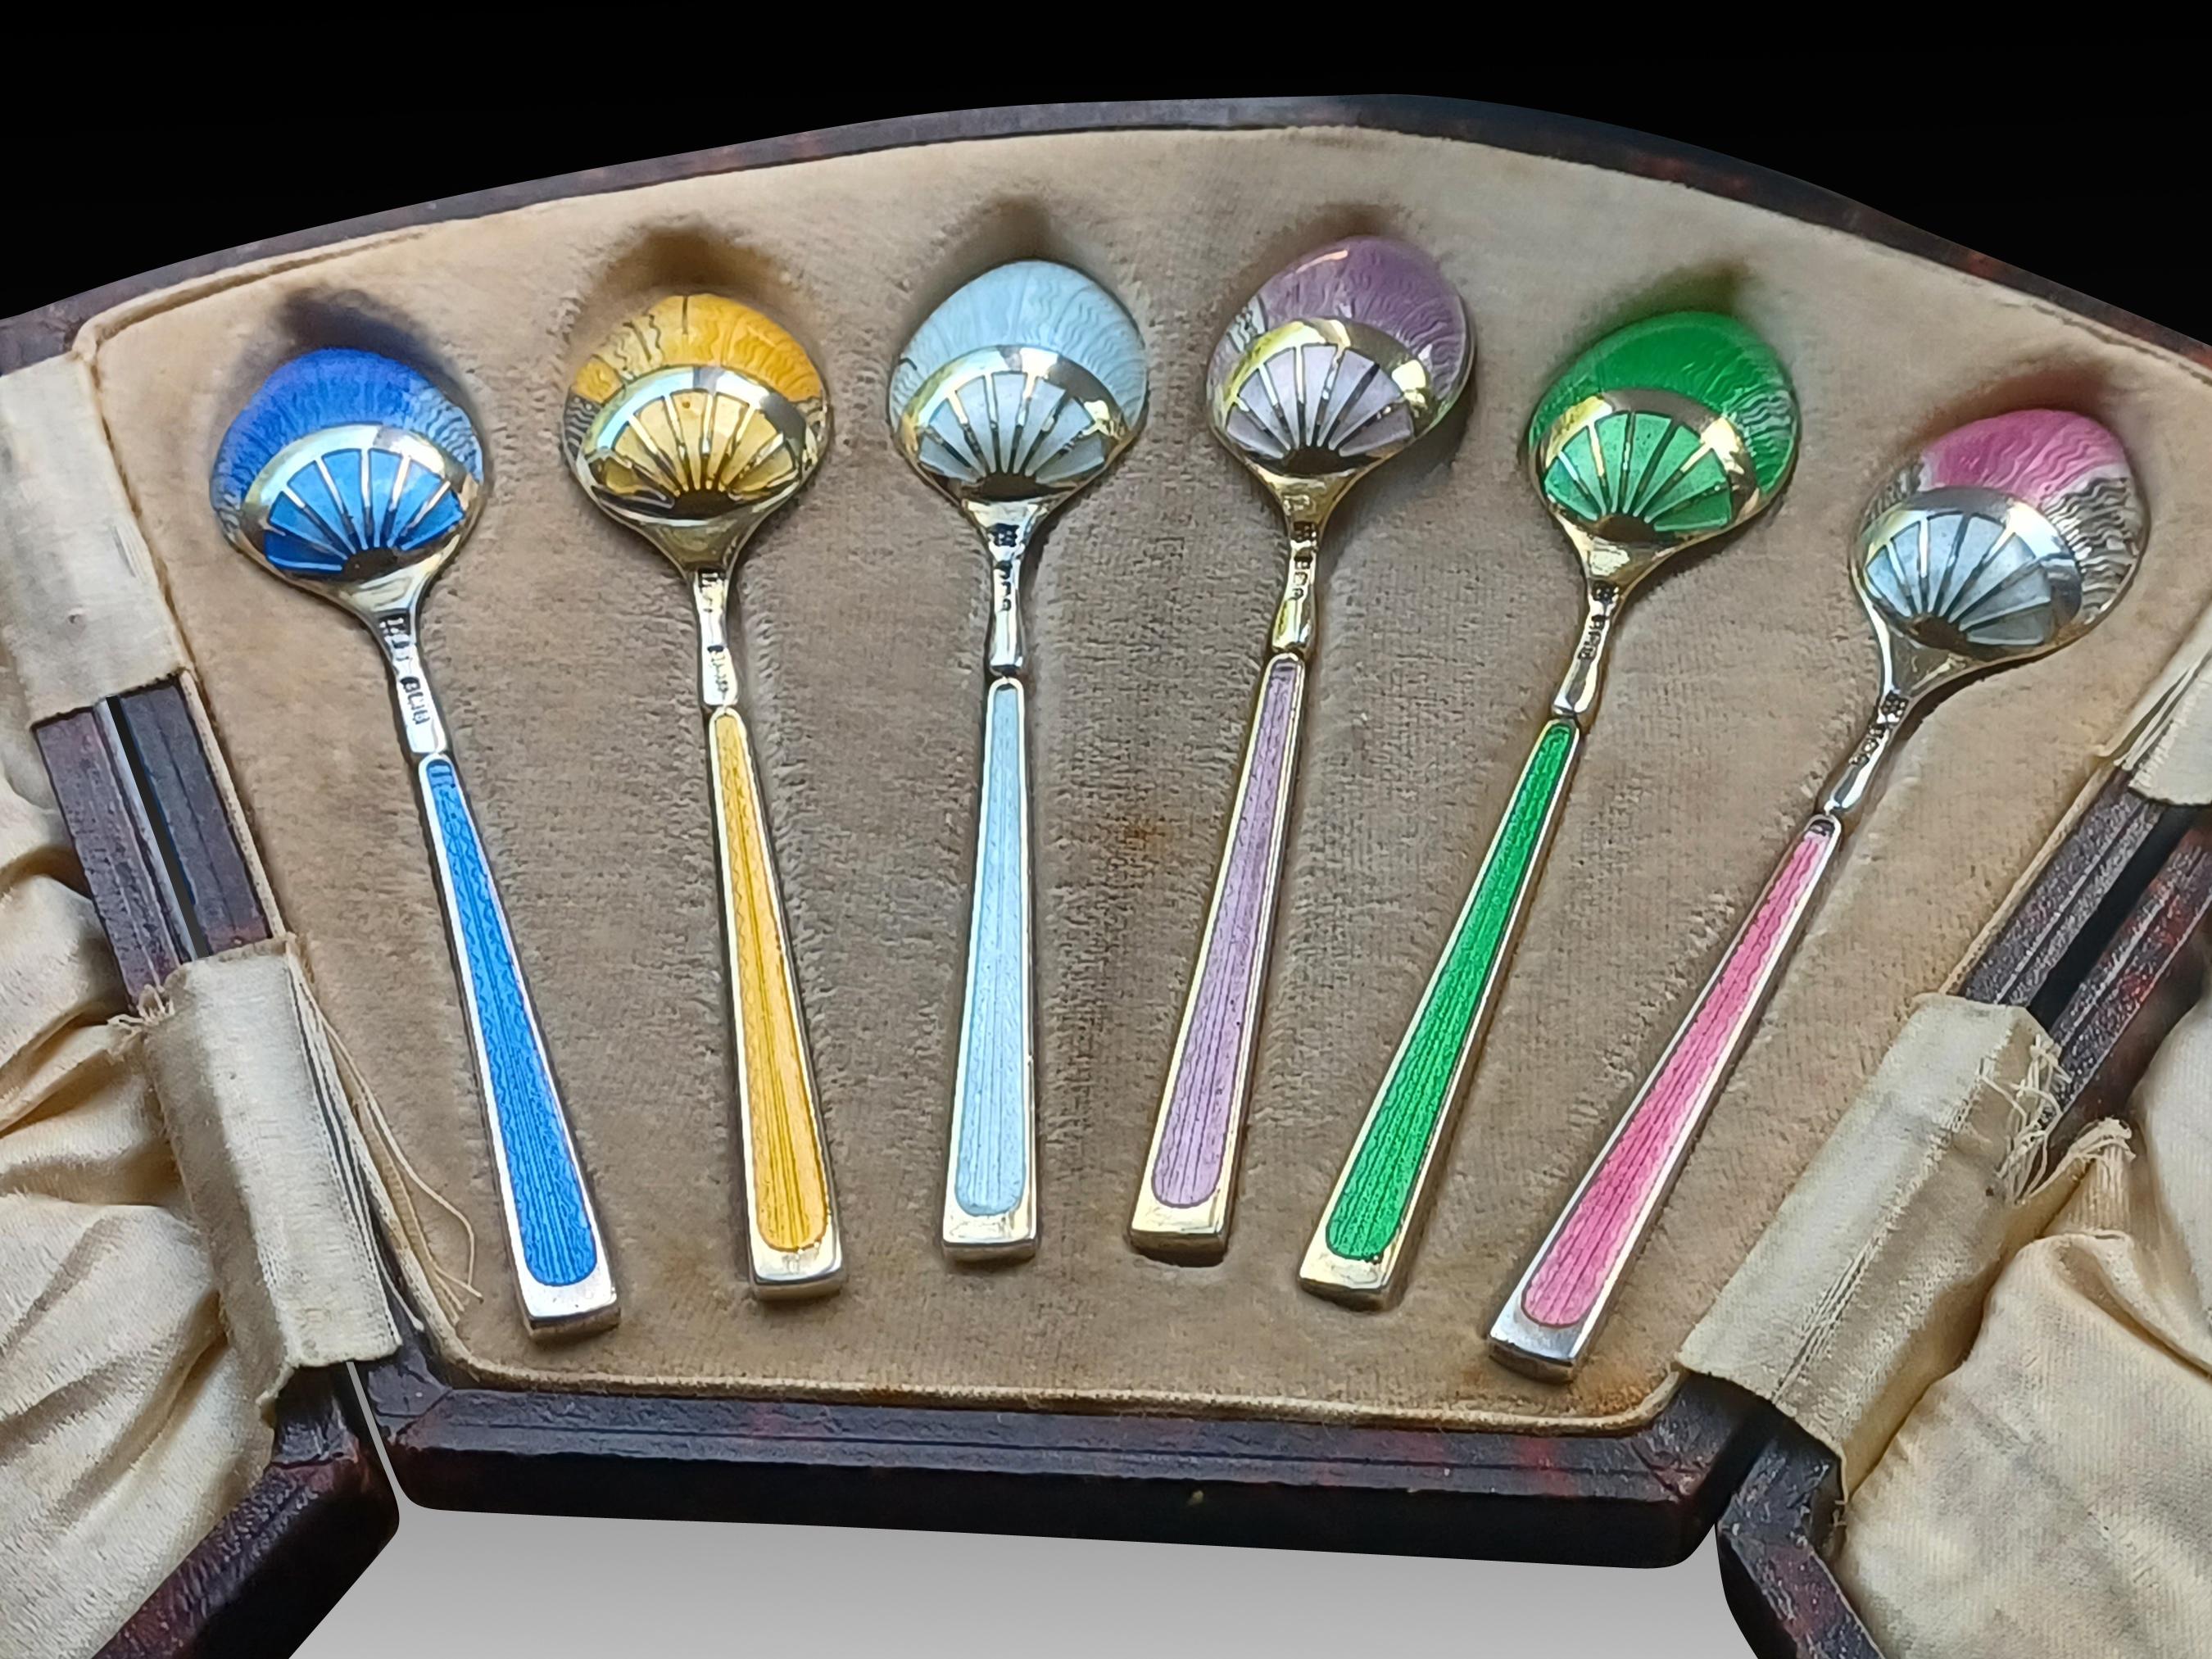 Rare Art Deco Gilt Guilloche Enamel Teaspoon Set in Original Leather Case 

Of pure 1920s extravagance with a custom rainbow of gilt, guilloche enamelled Art Deco spoons in the English style, all contained in the original tooled brown fanned leather